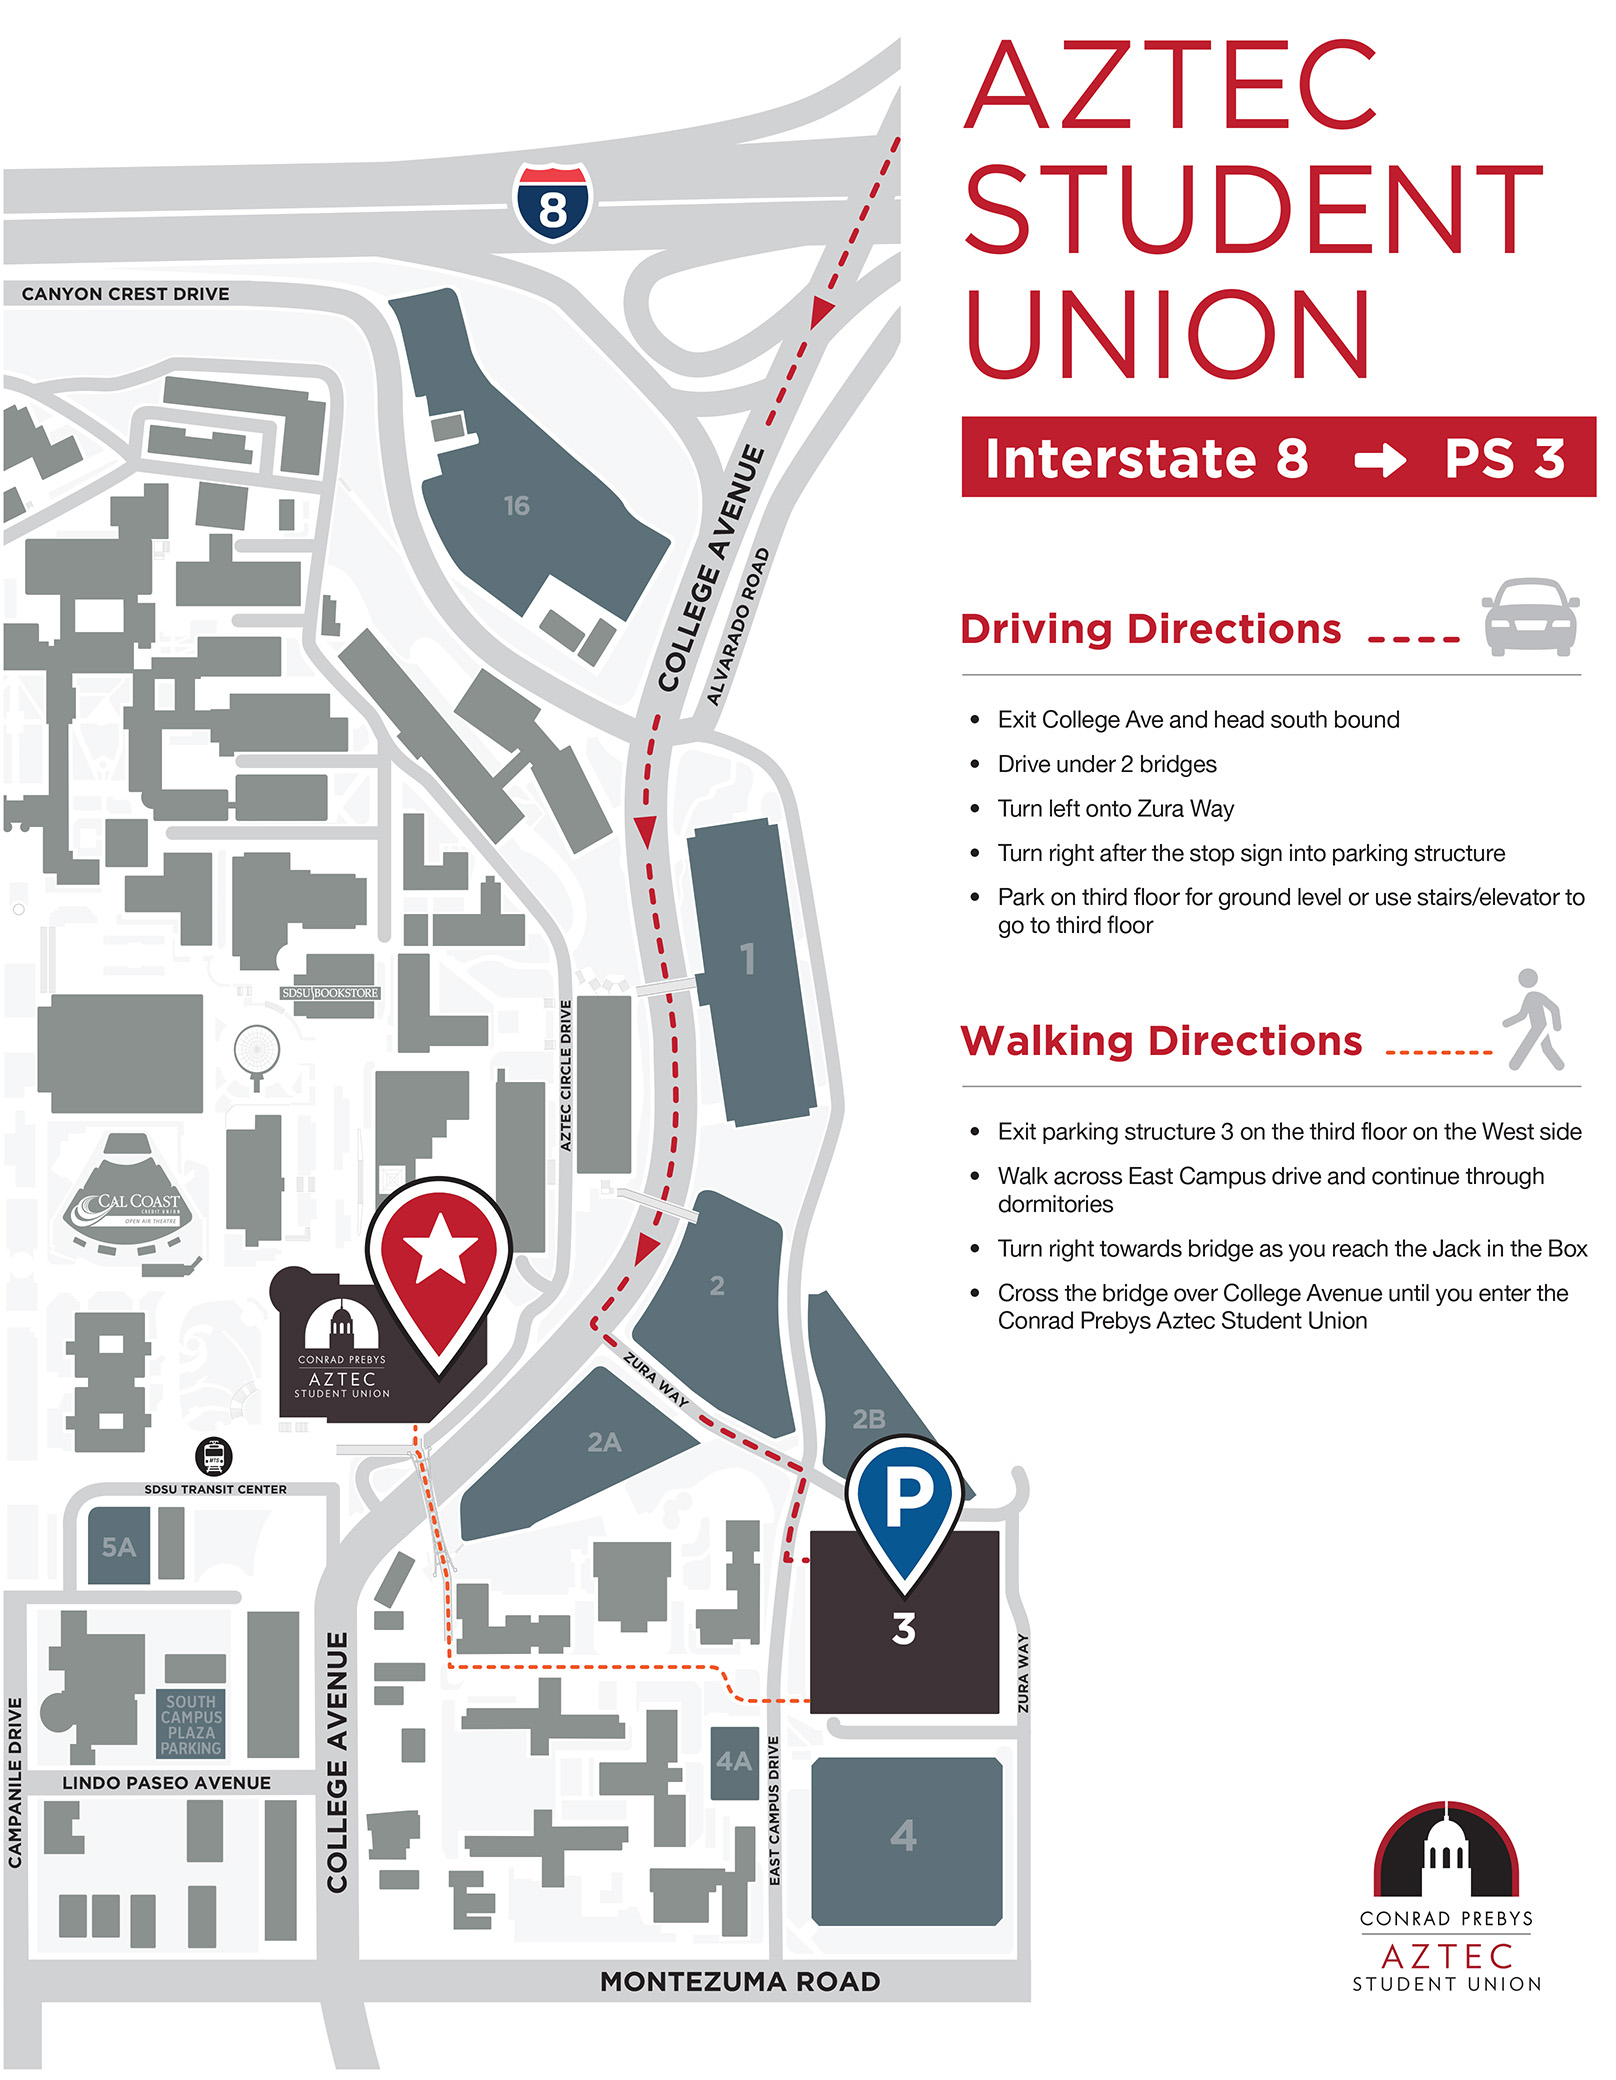 Map of san diego state campus outlining walking and driving directions to the student union from interstate 8